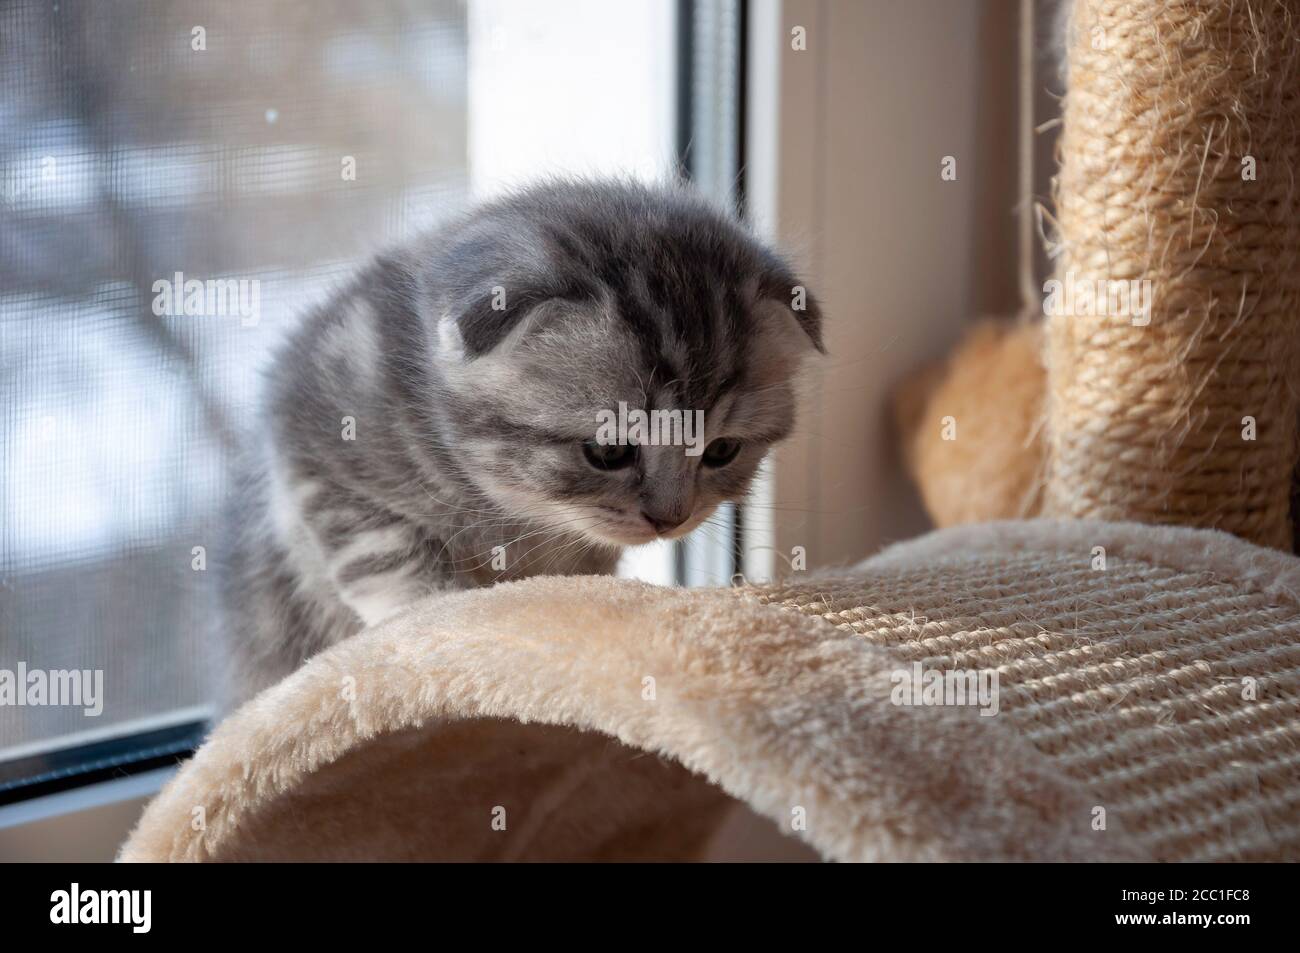 scared, uncertain kitten takes the first steps Stock Photo